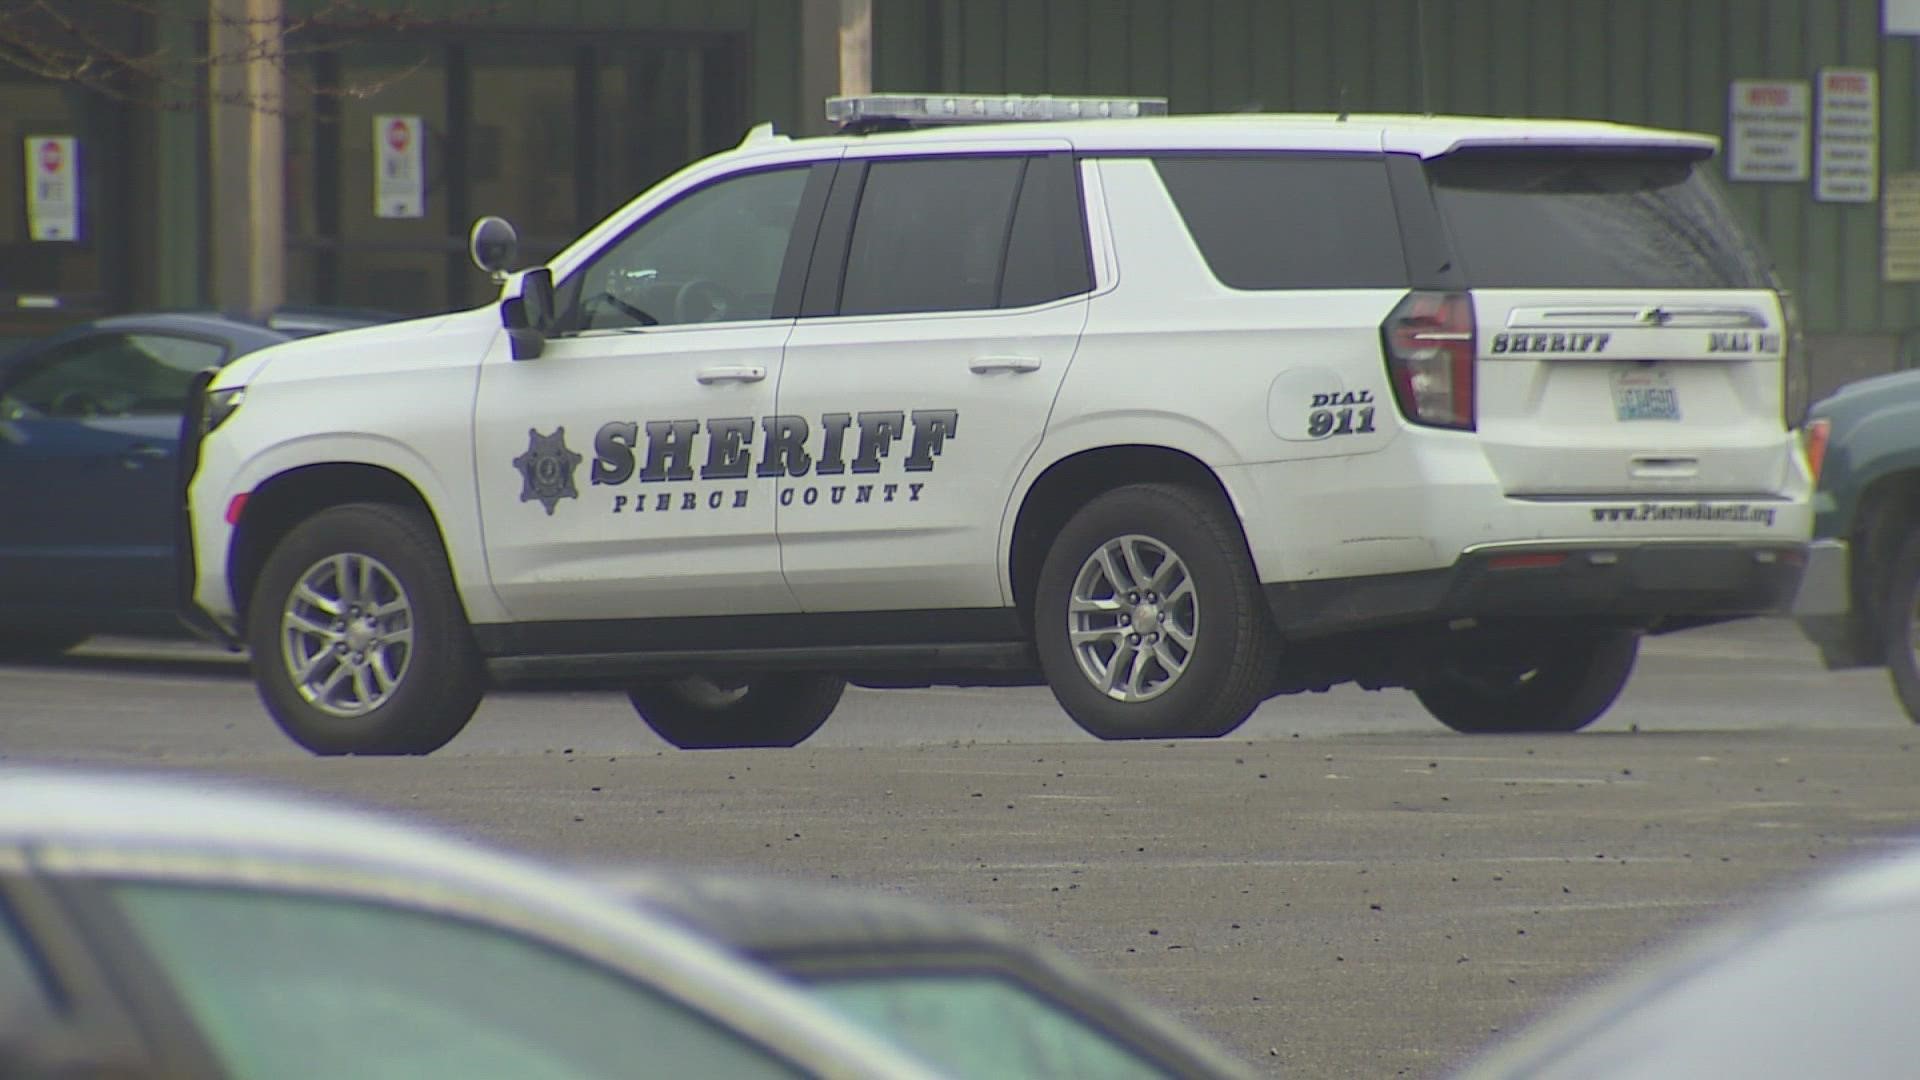 Two deputies were assisting with an investigation when they found the body.